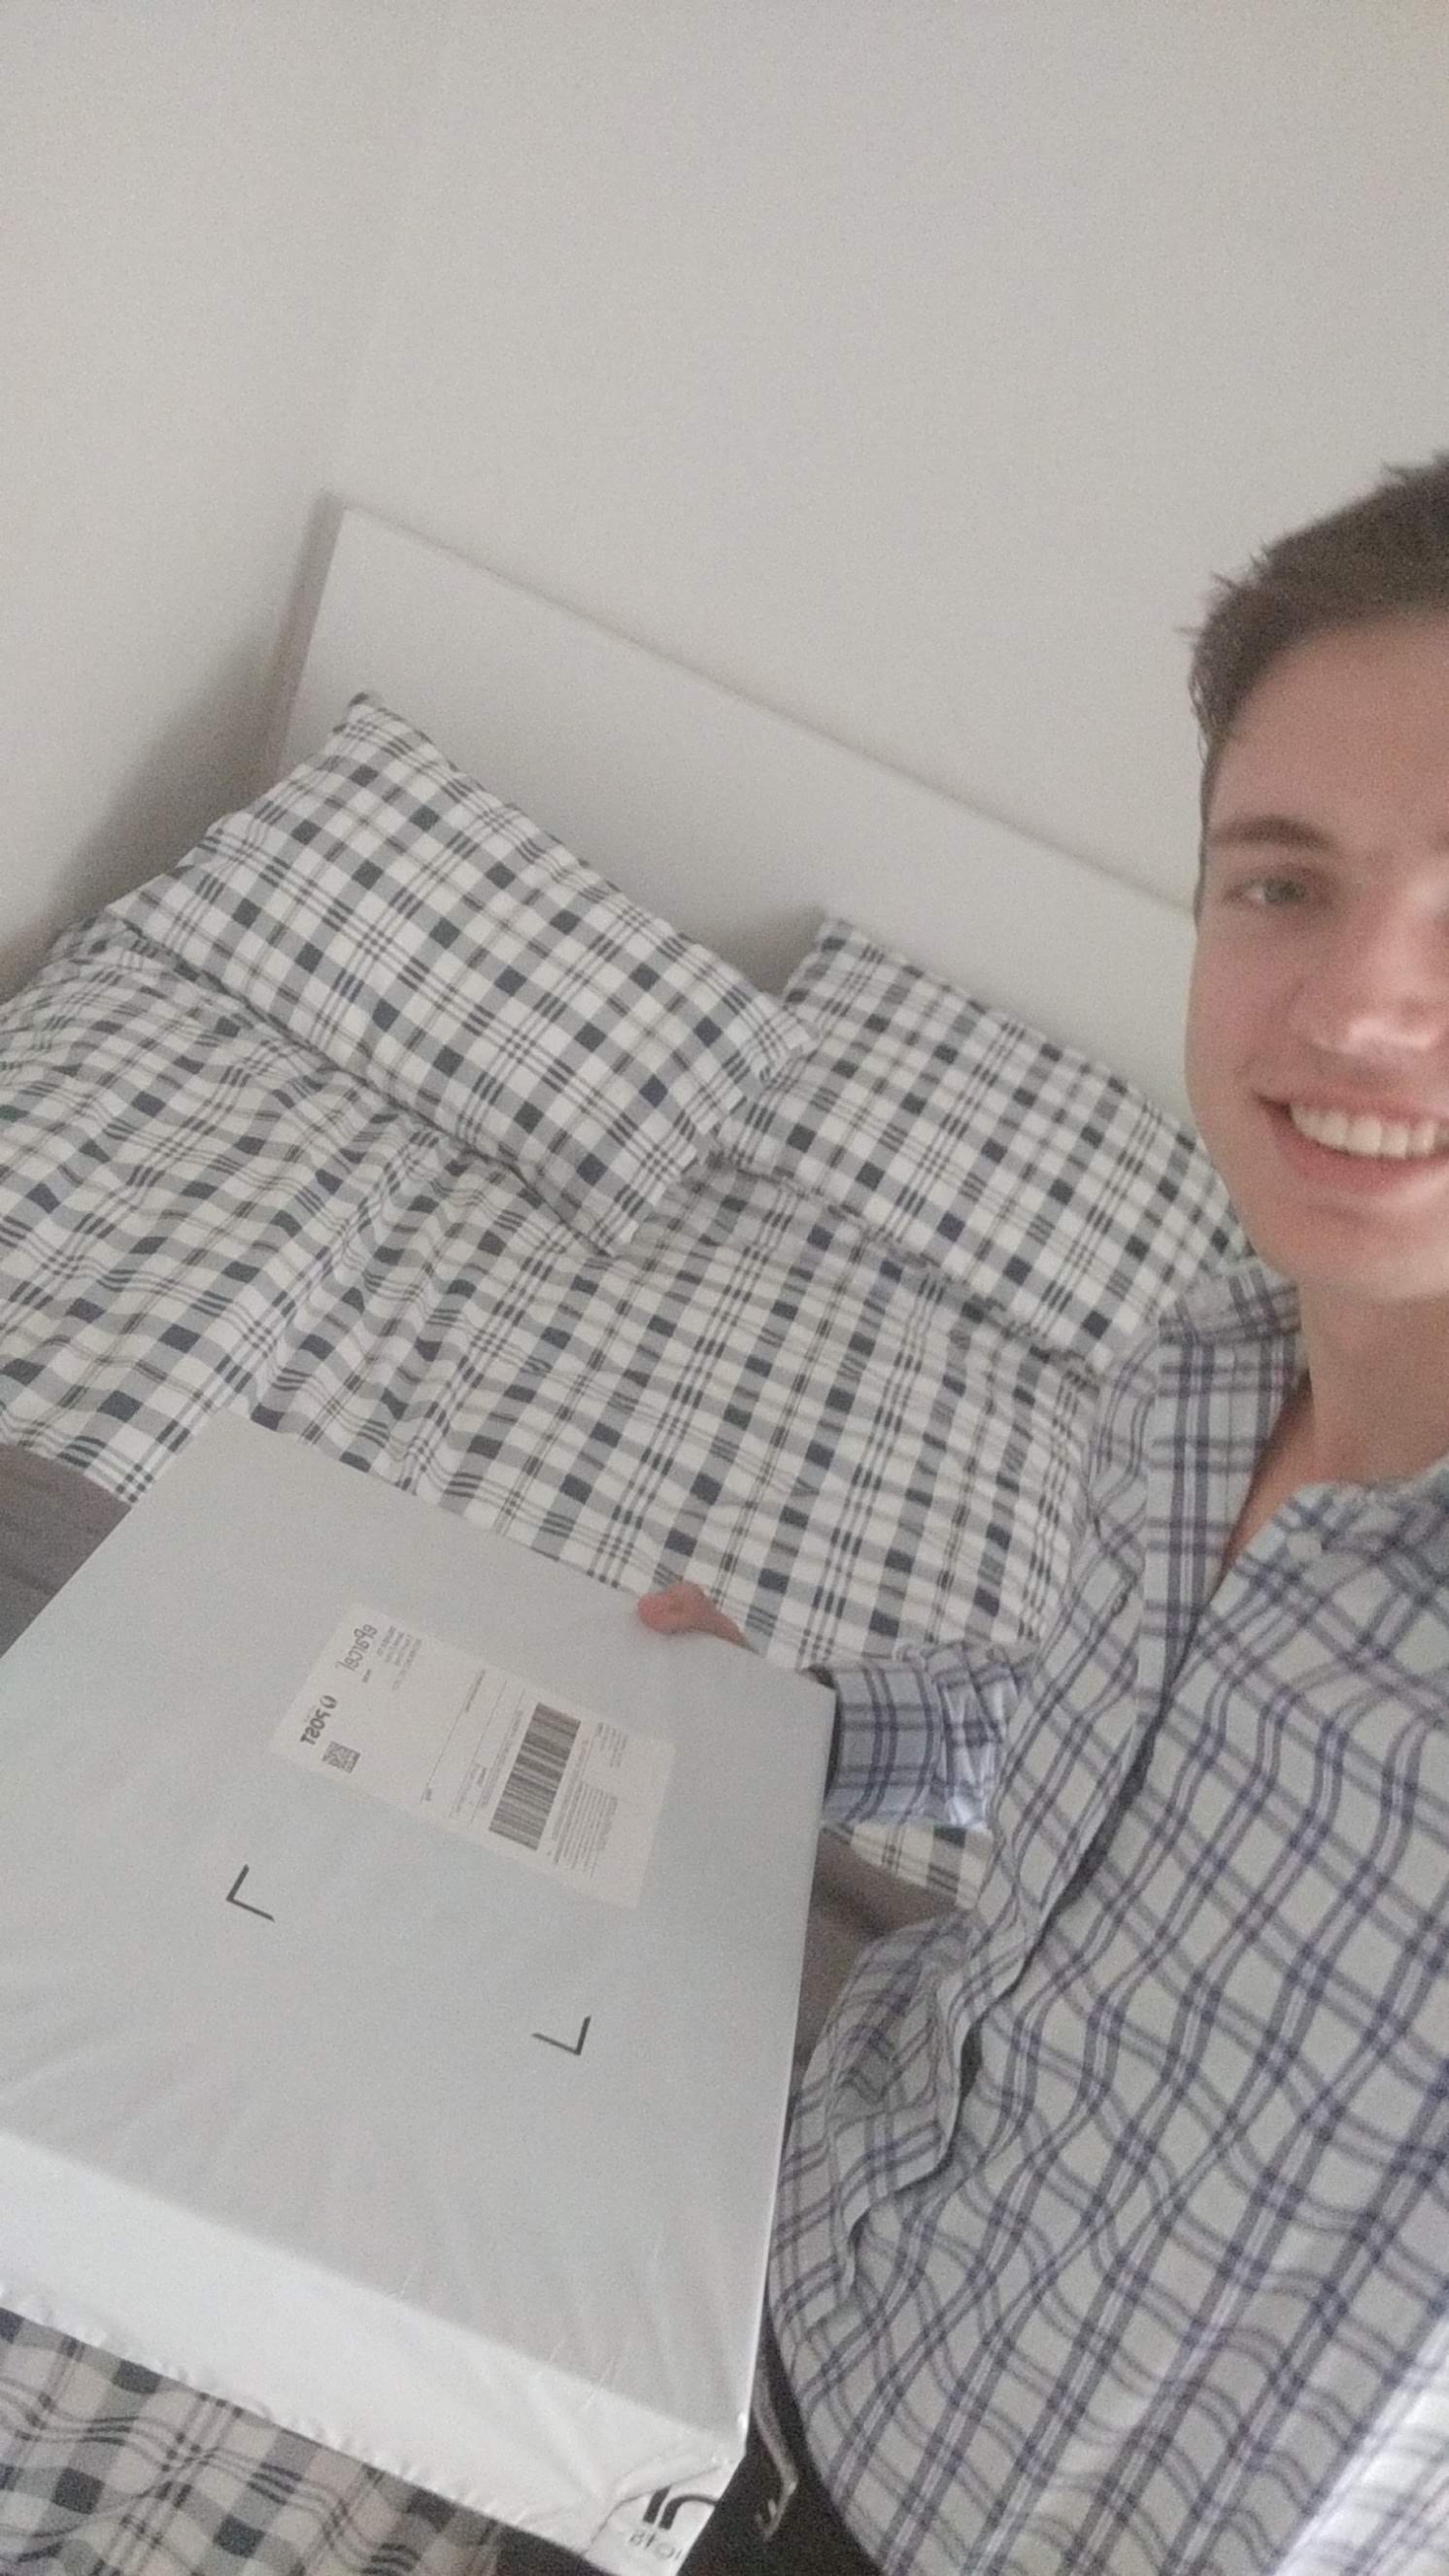 Opening a present in Melbourne - matching shirt and sheets! - 12th of Feb